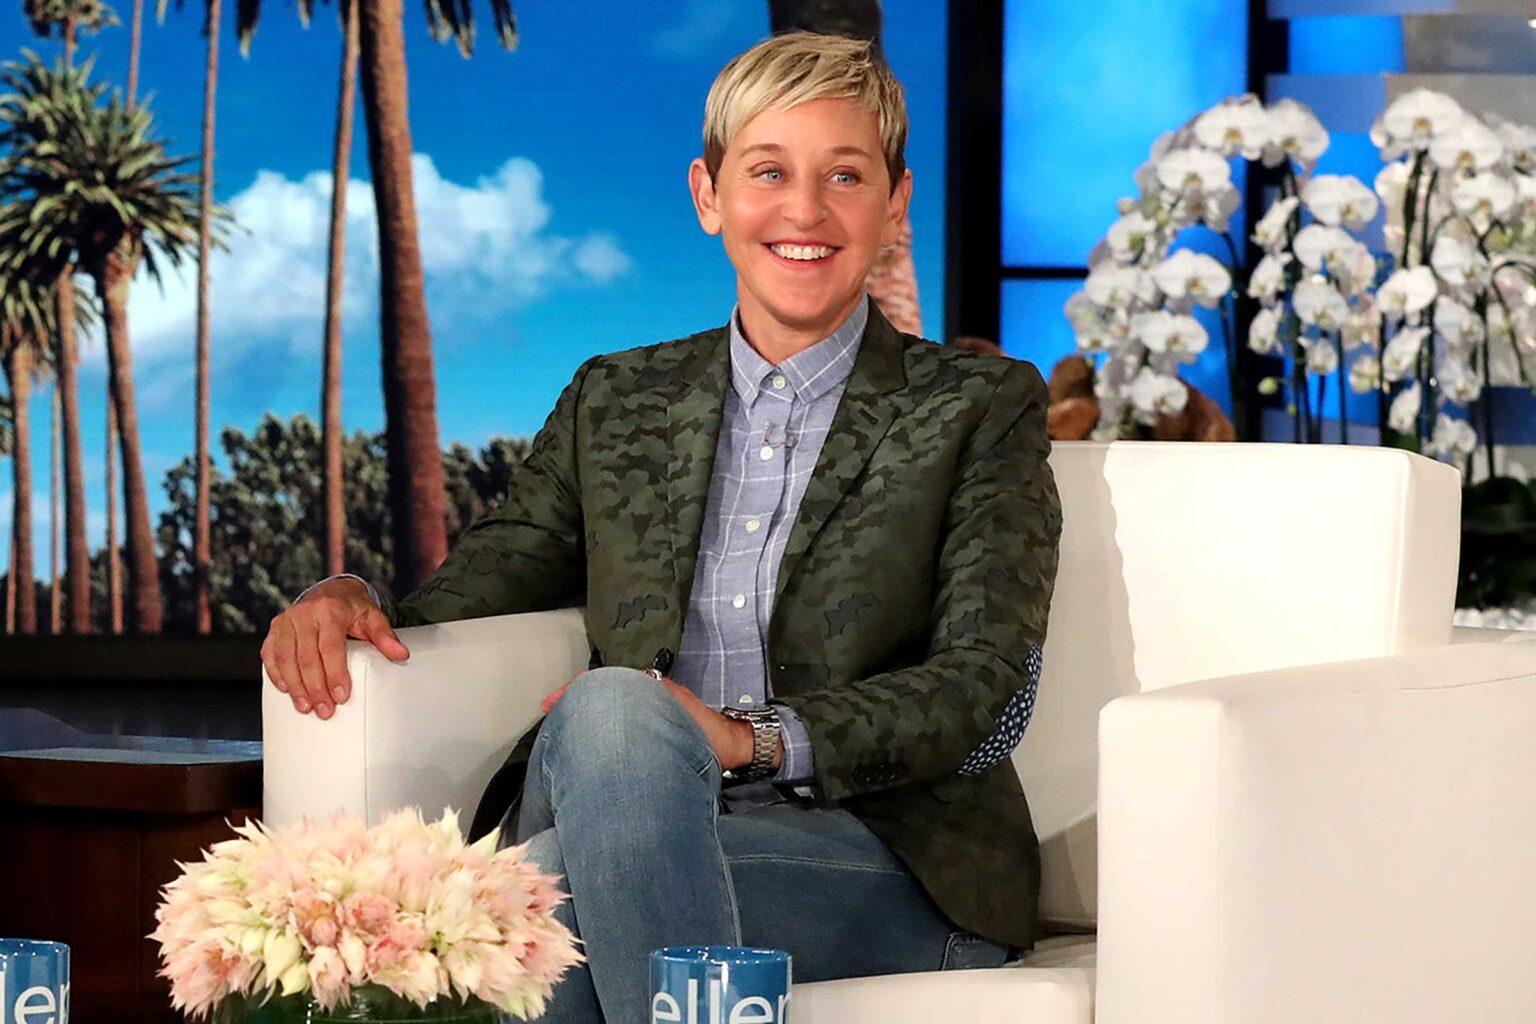 'The Ellen DeGeneres Show' has seen a steady and (so far) unending drop in viewership as of late. Here's what we know about the cancellation.